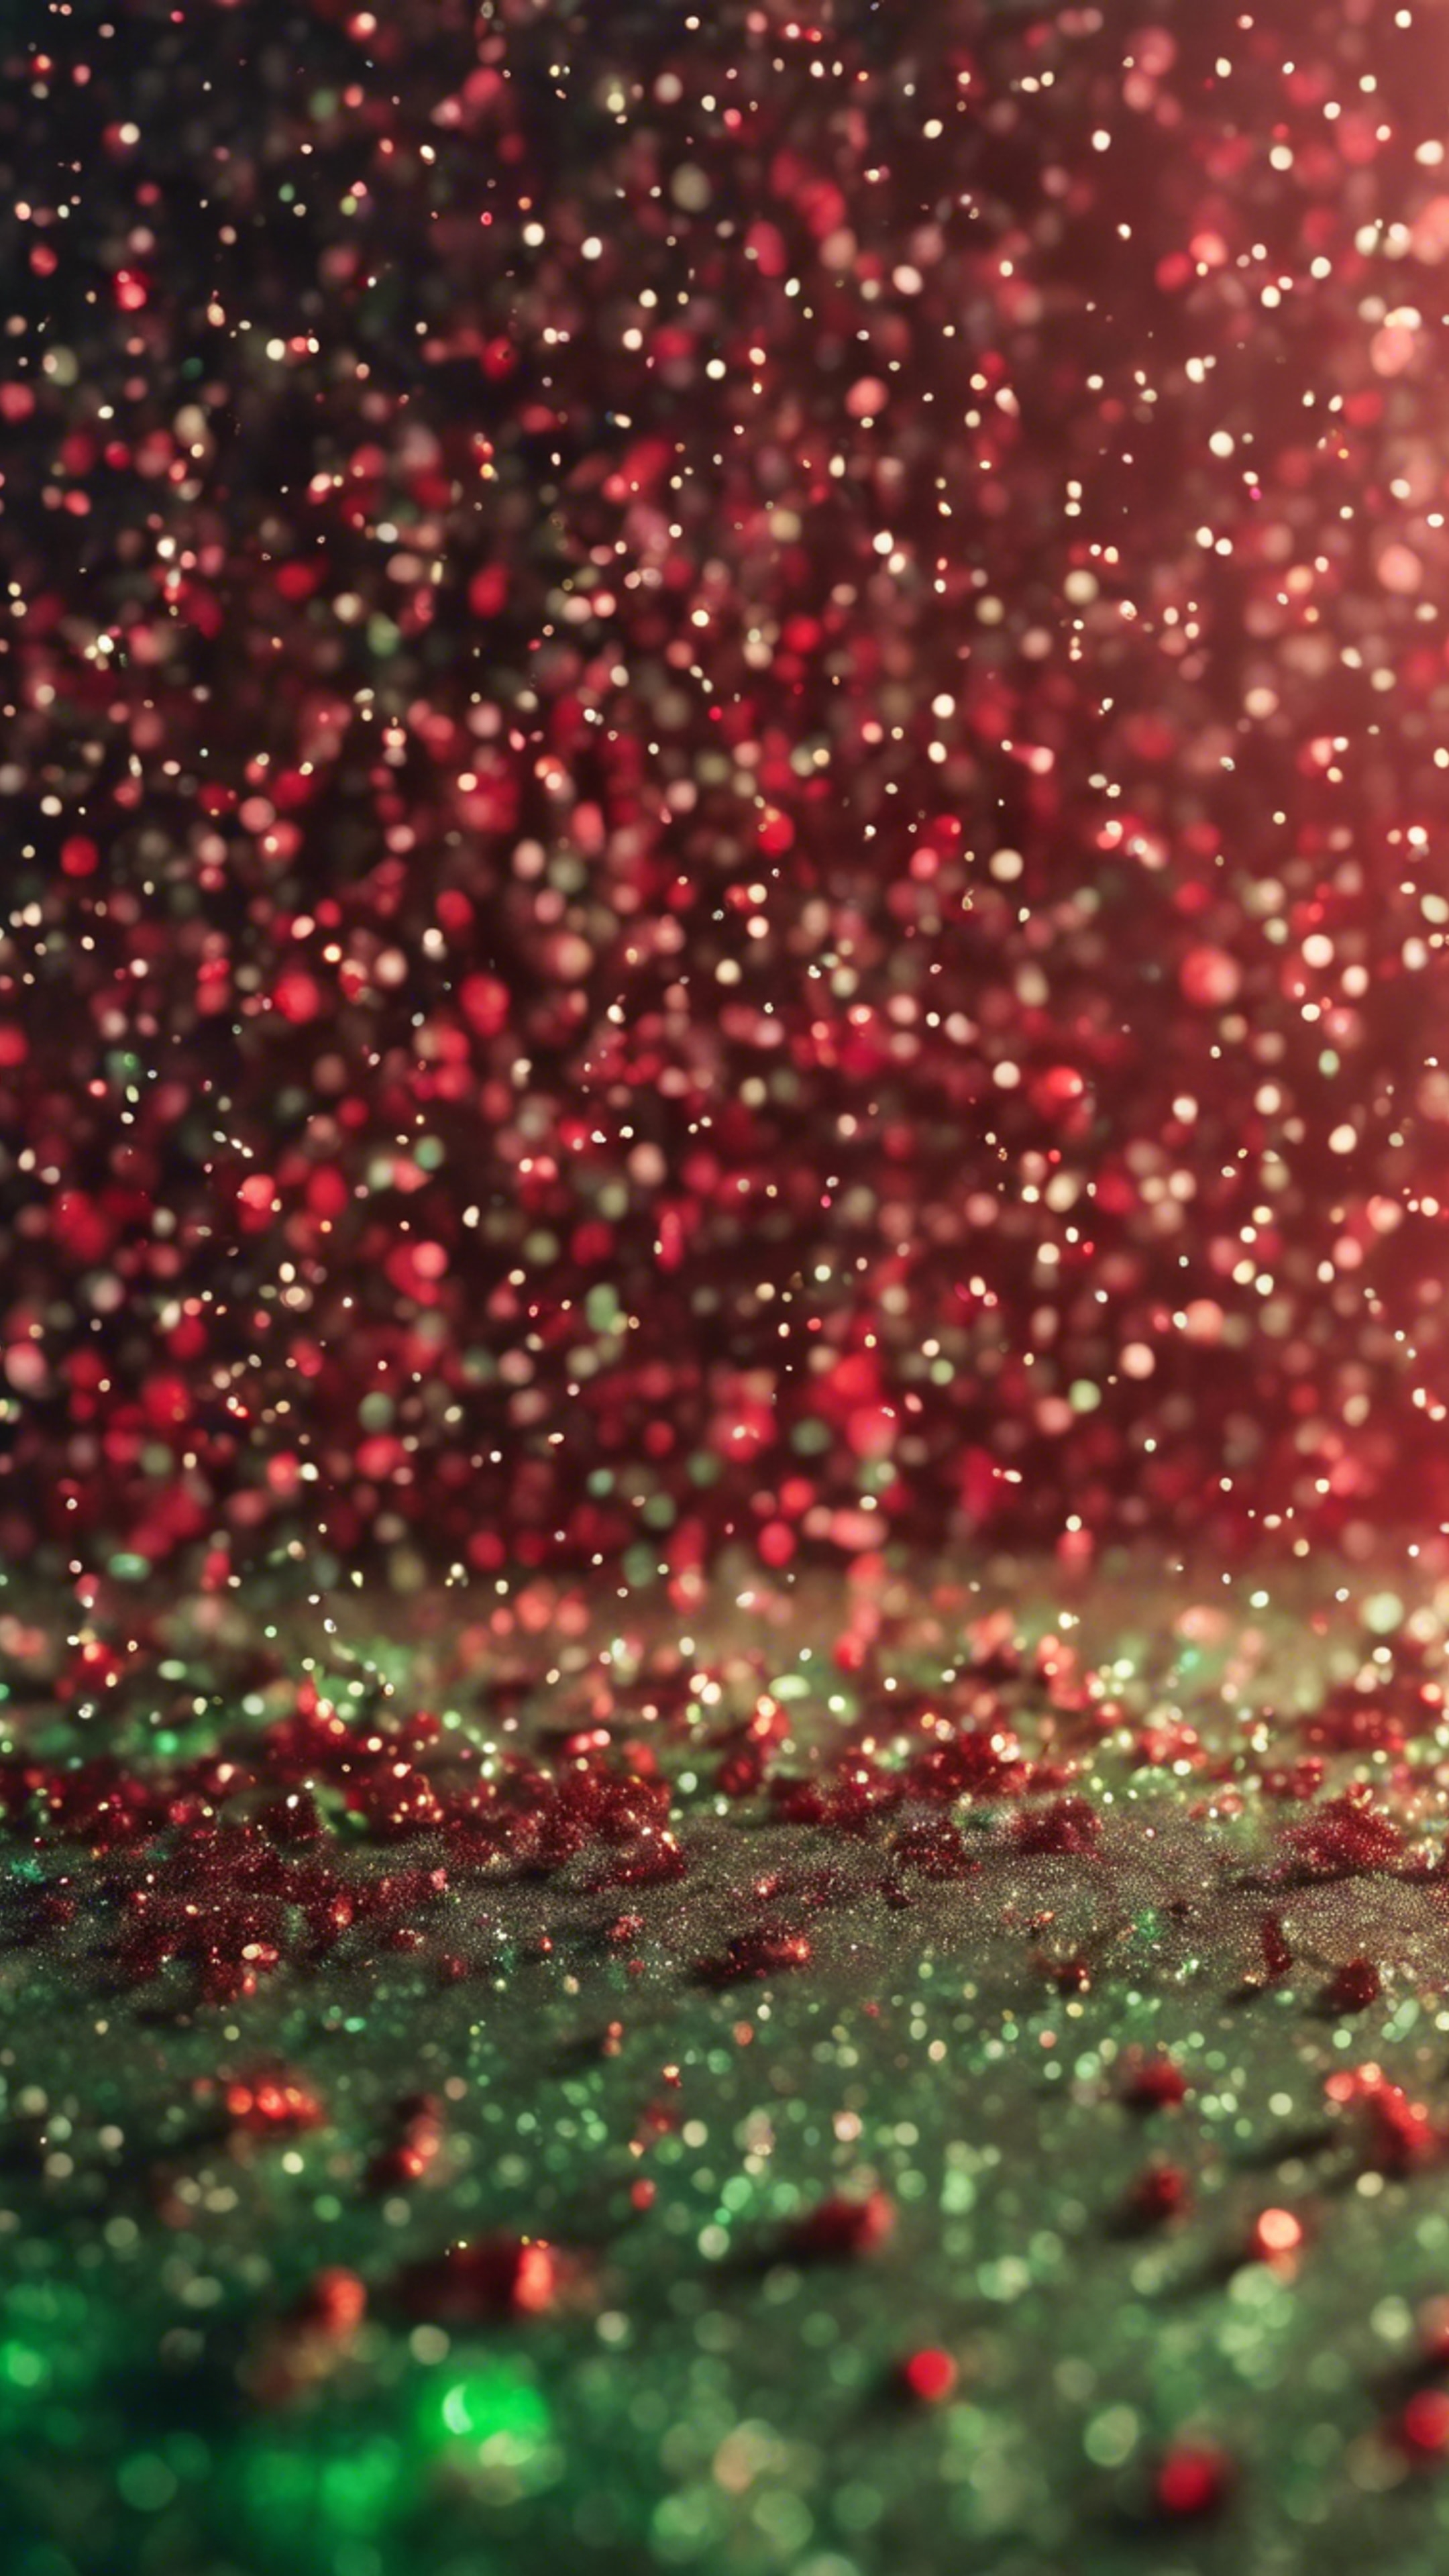 Tiny green and red glitter particles scattered randomly Tapet[e9e8f5a2023d489ba4c1]